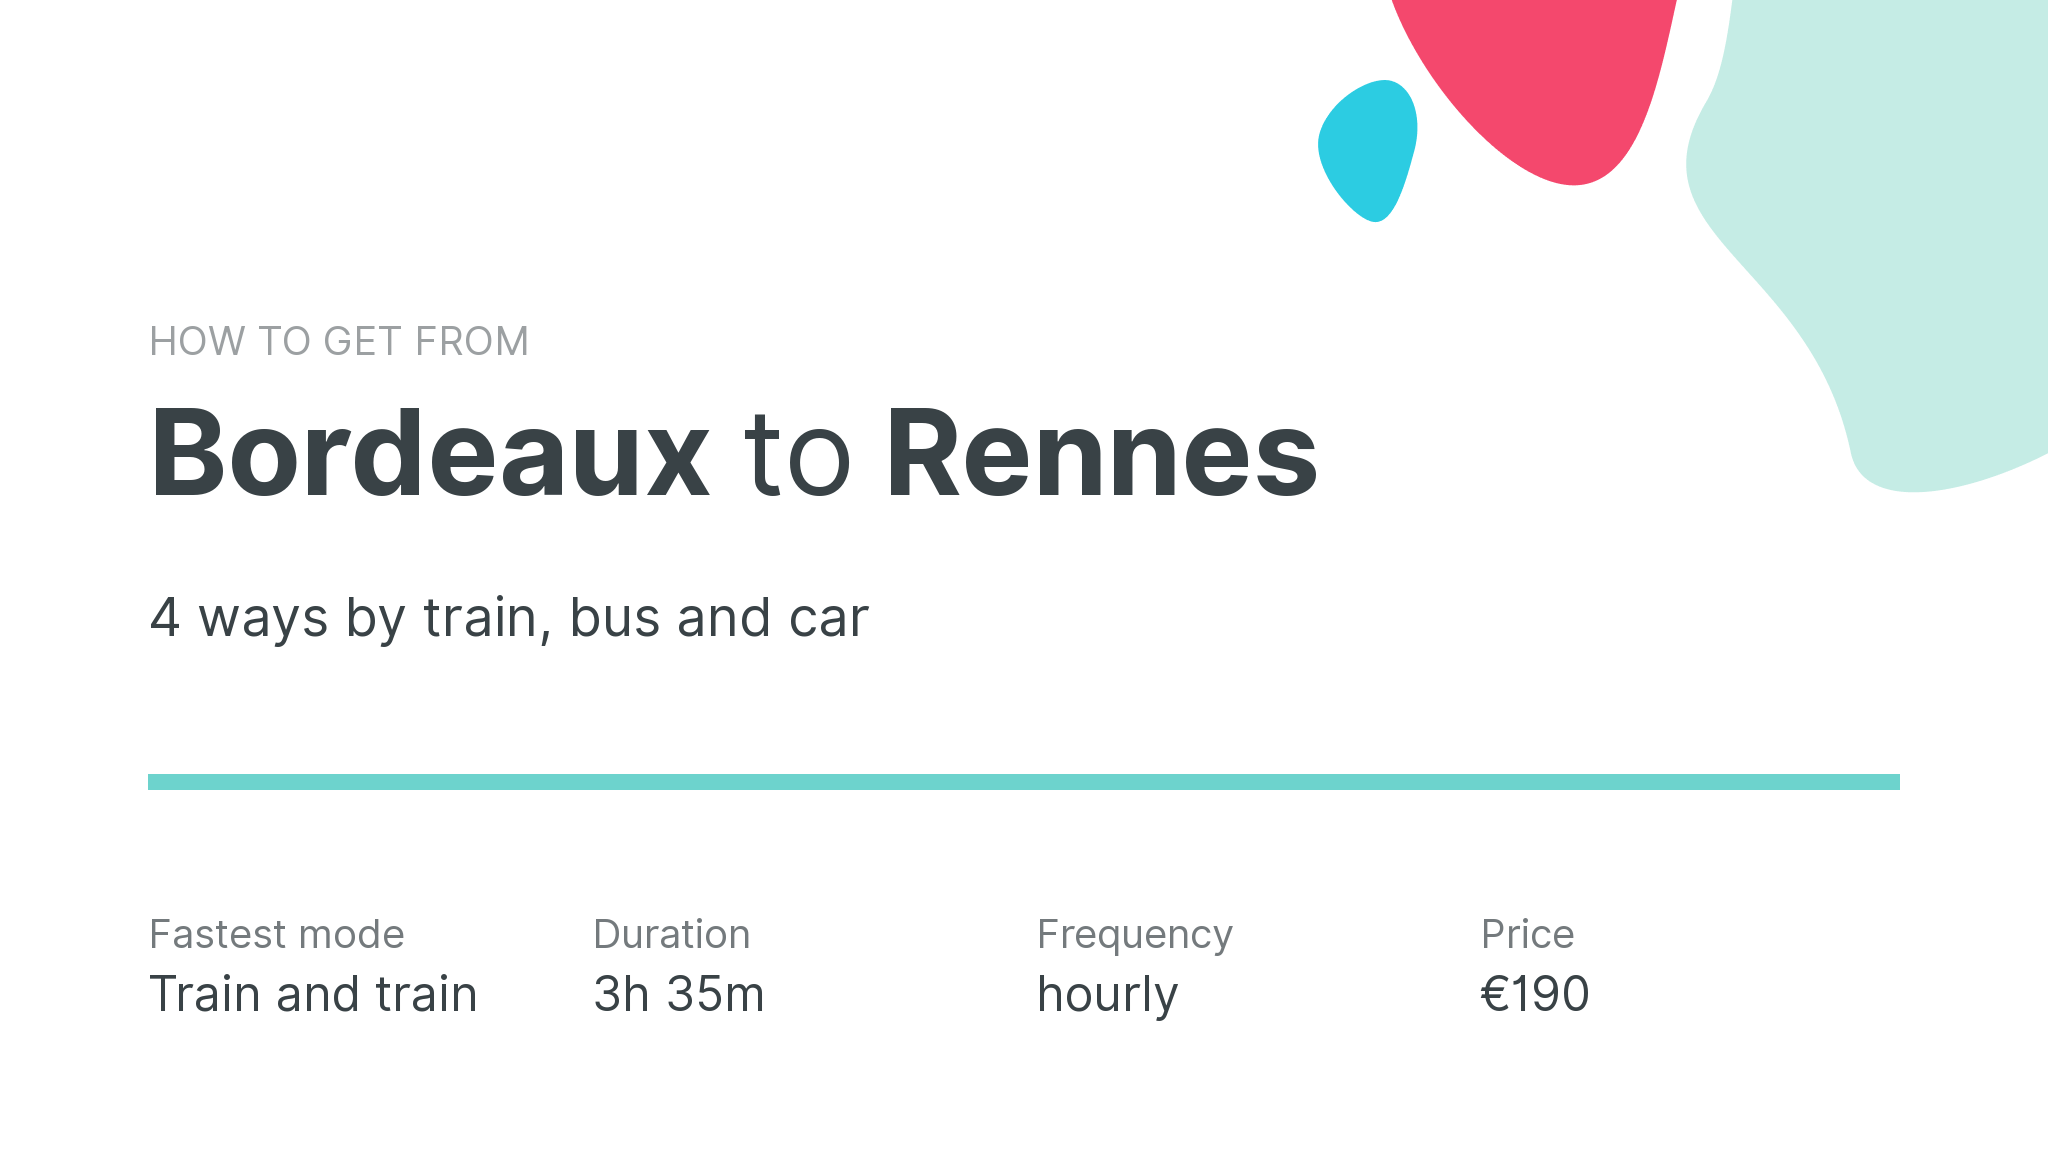 How do I get from Bordeaux to Rennes